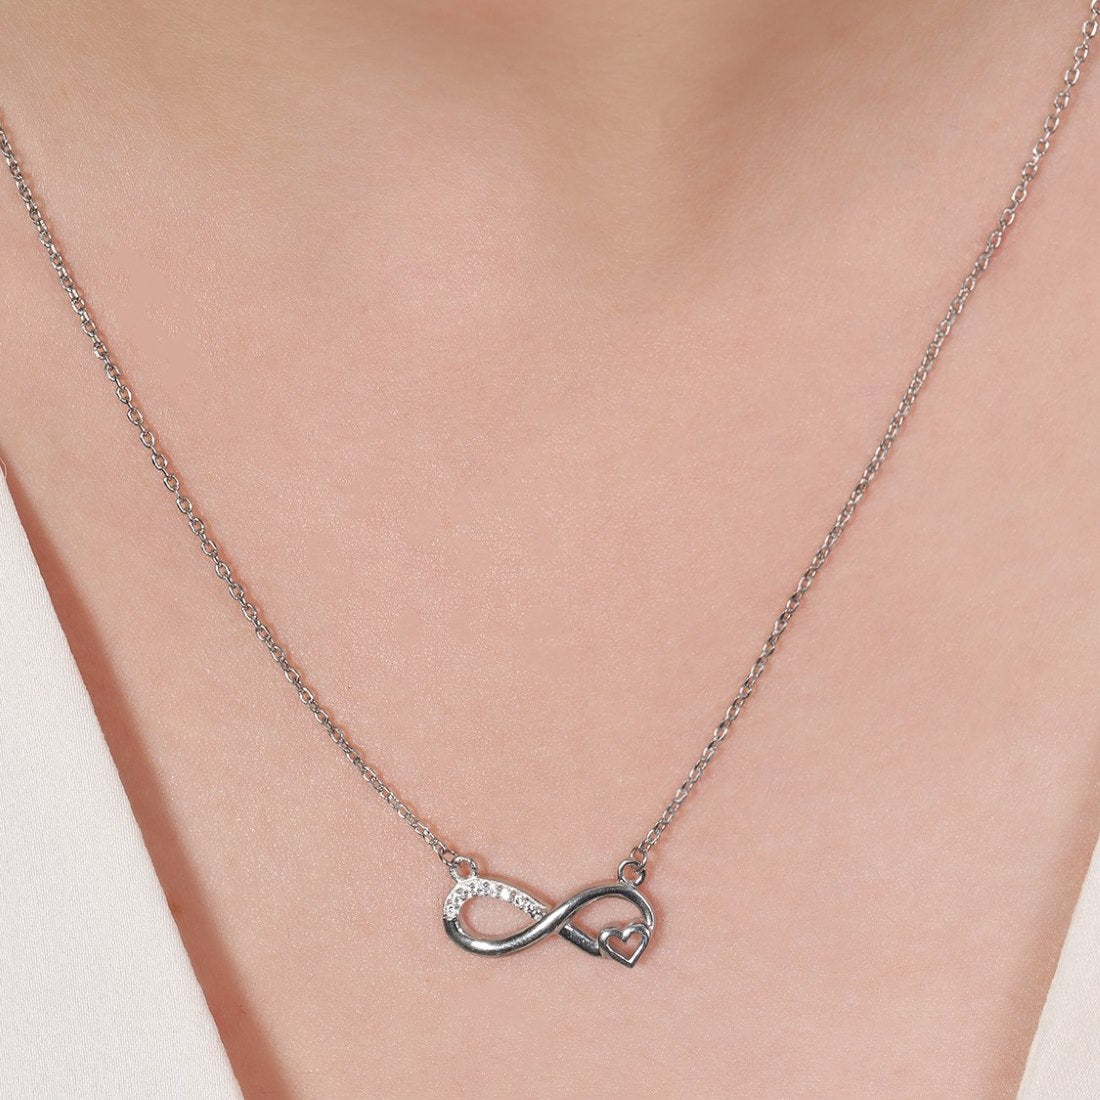 Infinite Devotion Rhodium-Plated 925 Sterling Silver Necklace